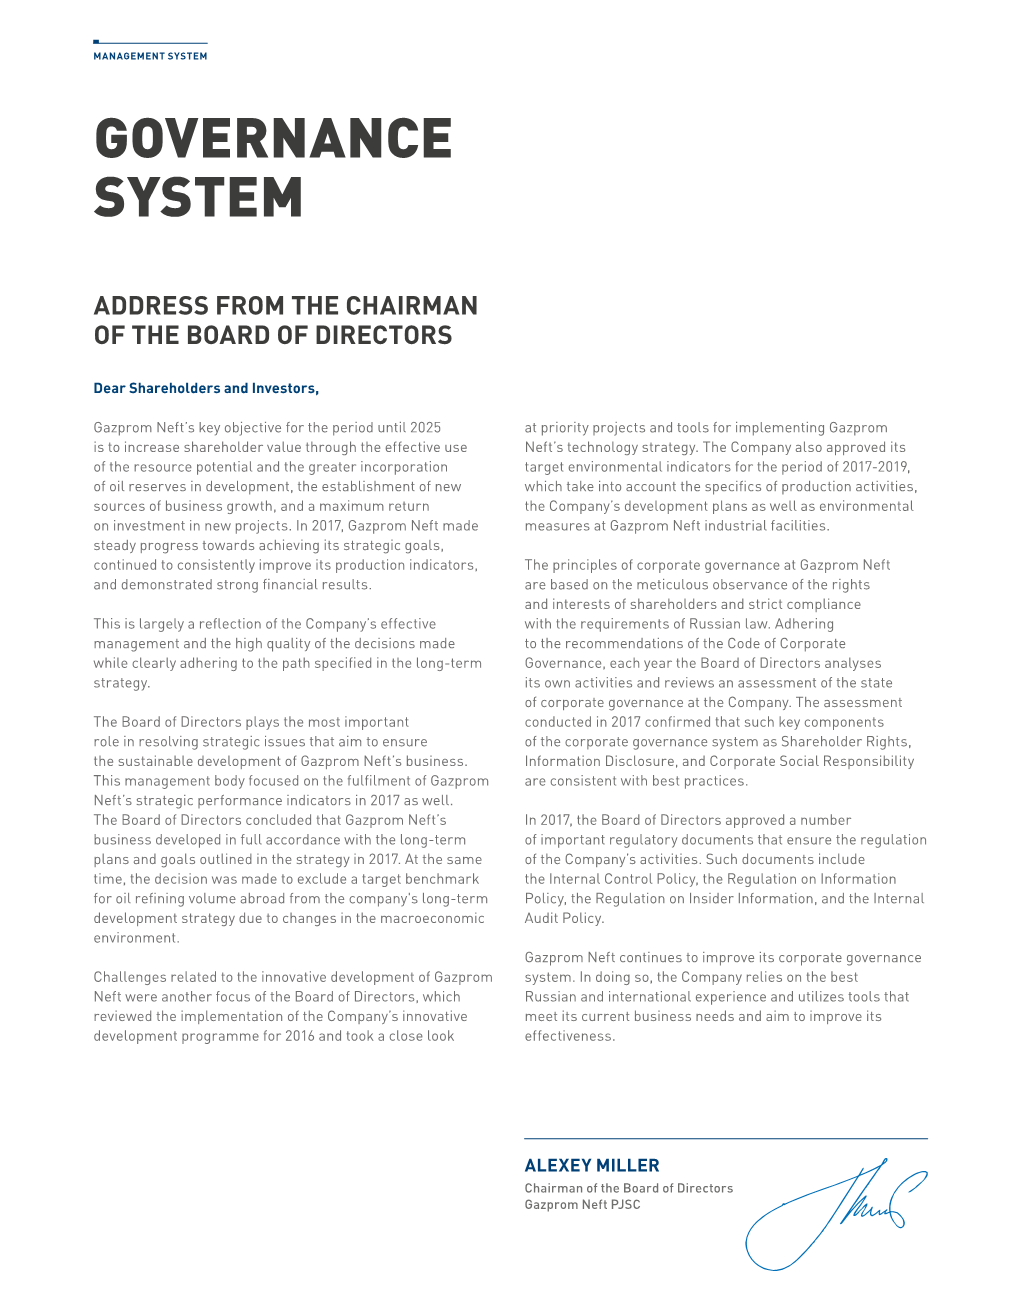 Corporate Governance System As Shareholder Rights, the Sustainable Development of Gazprom Neft’S Business